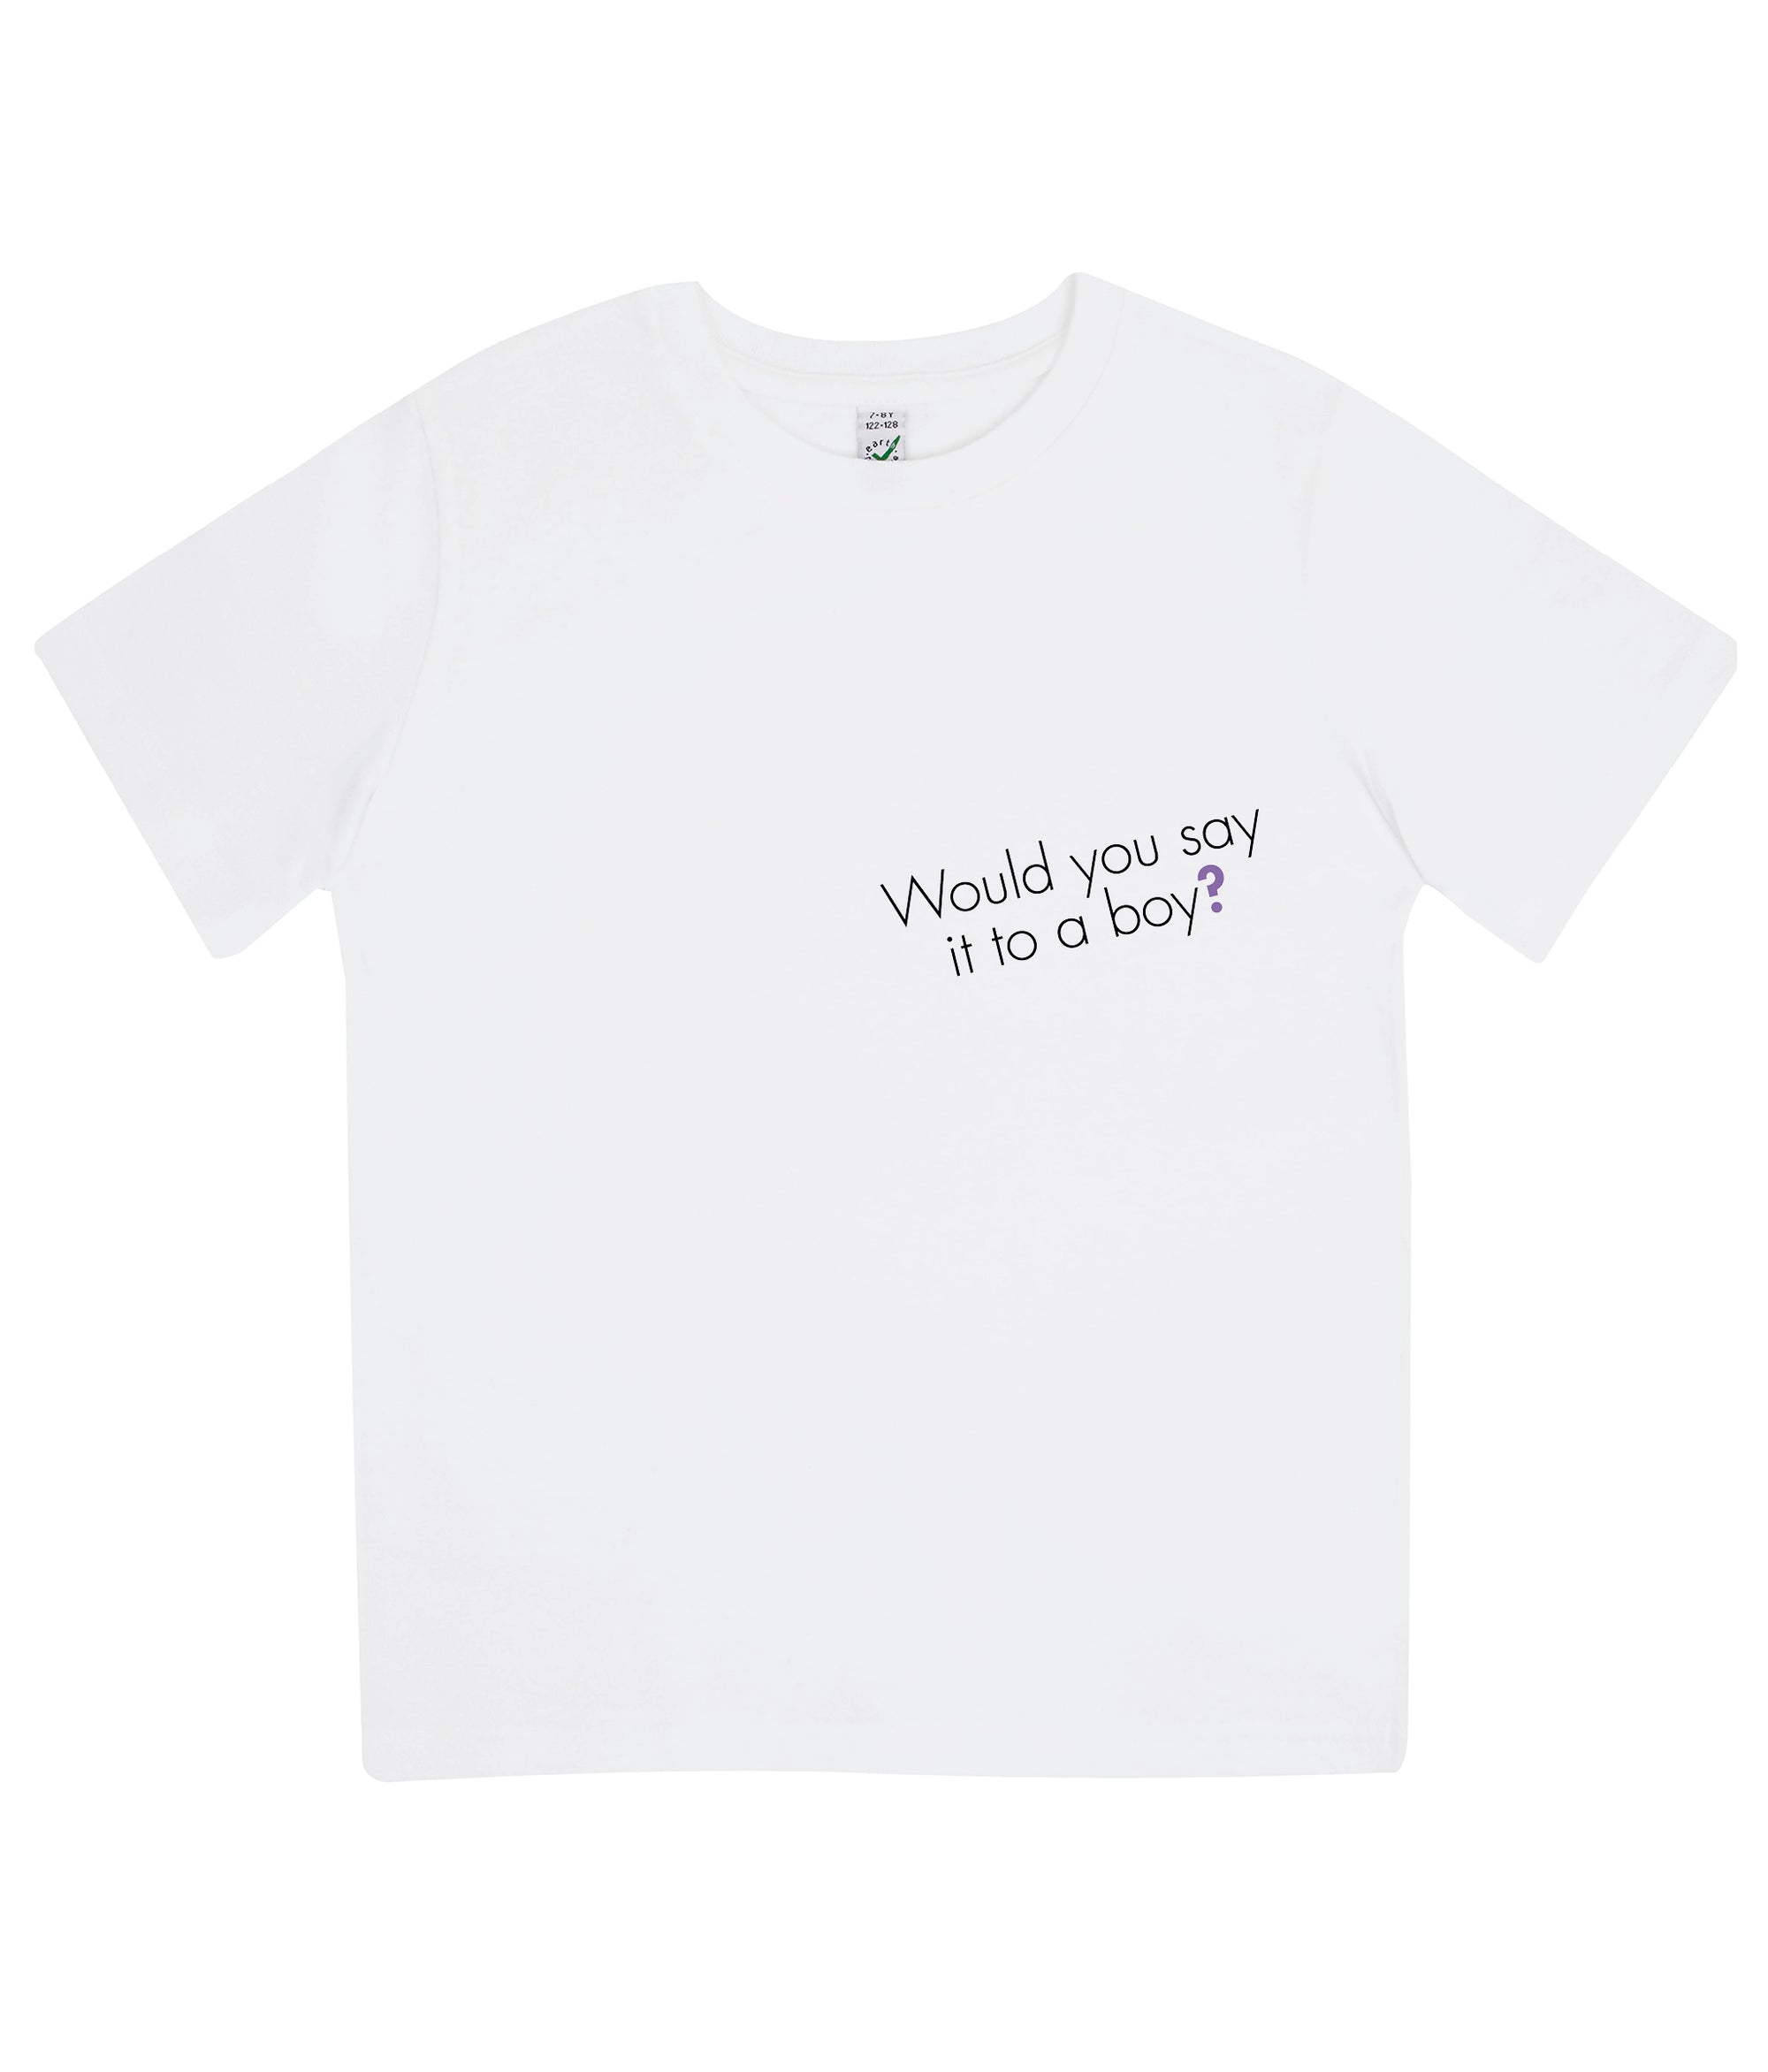 Would You Say It To A Boy Kids Organic Feminist T Shirt White